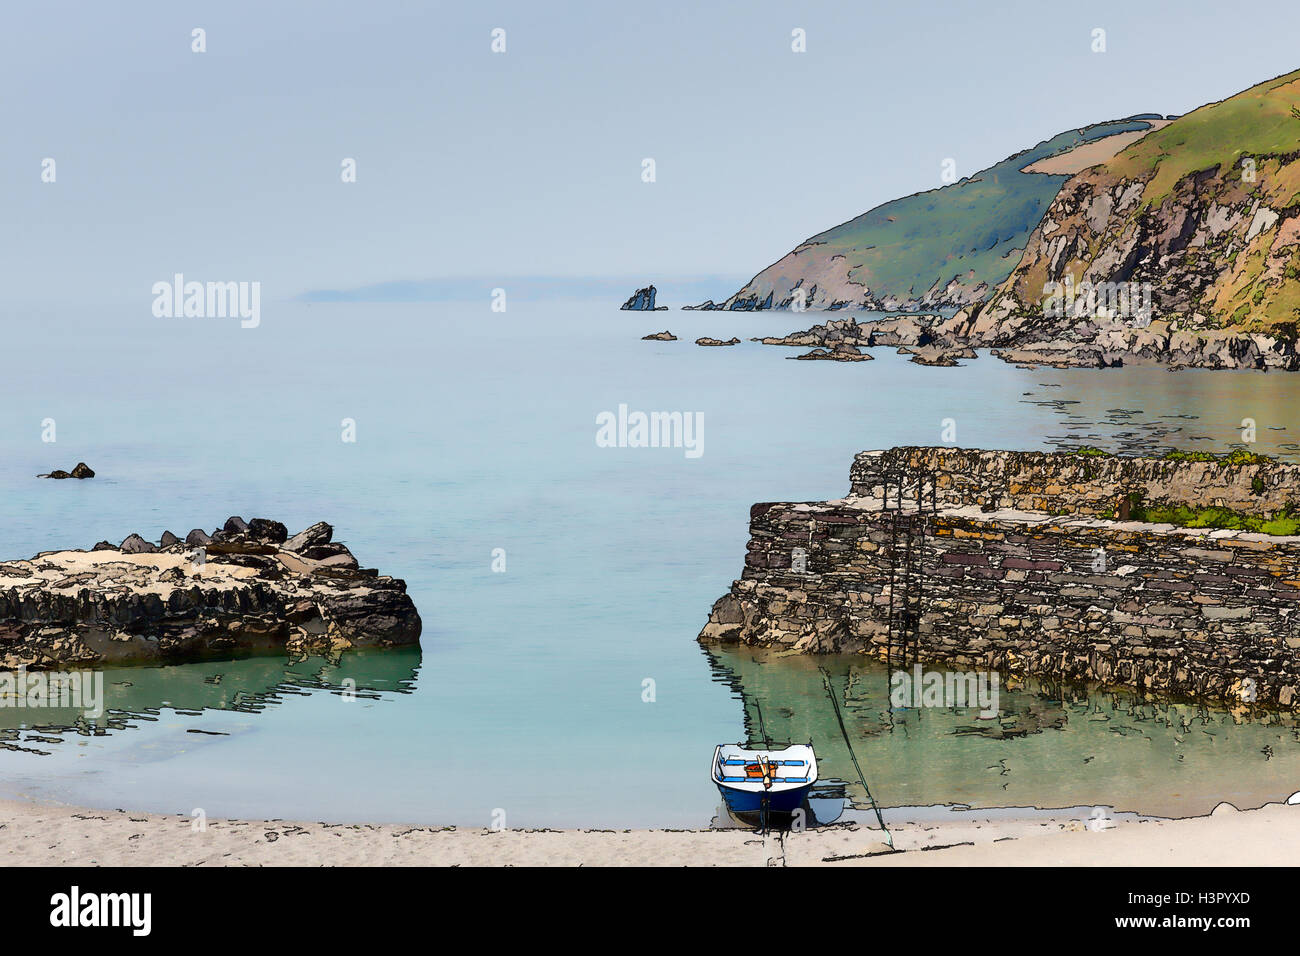 Tiny harbour with one boat and calm sea Portwrinkle near Looe Cornwall England uk illustration Stock Photo